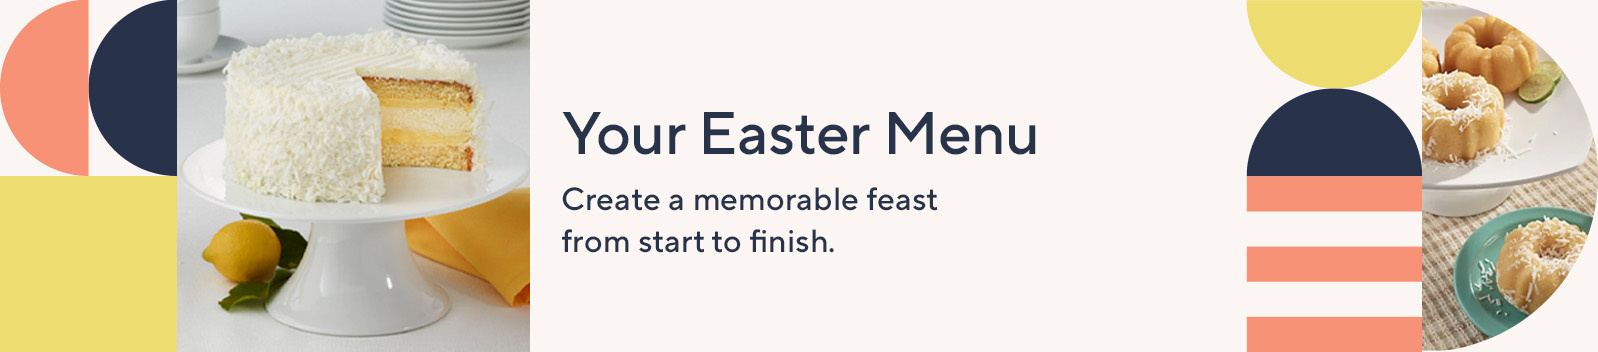 Your Easter Menu. Create a memorable feast from start to finish. 